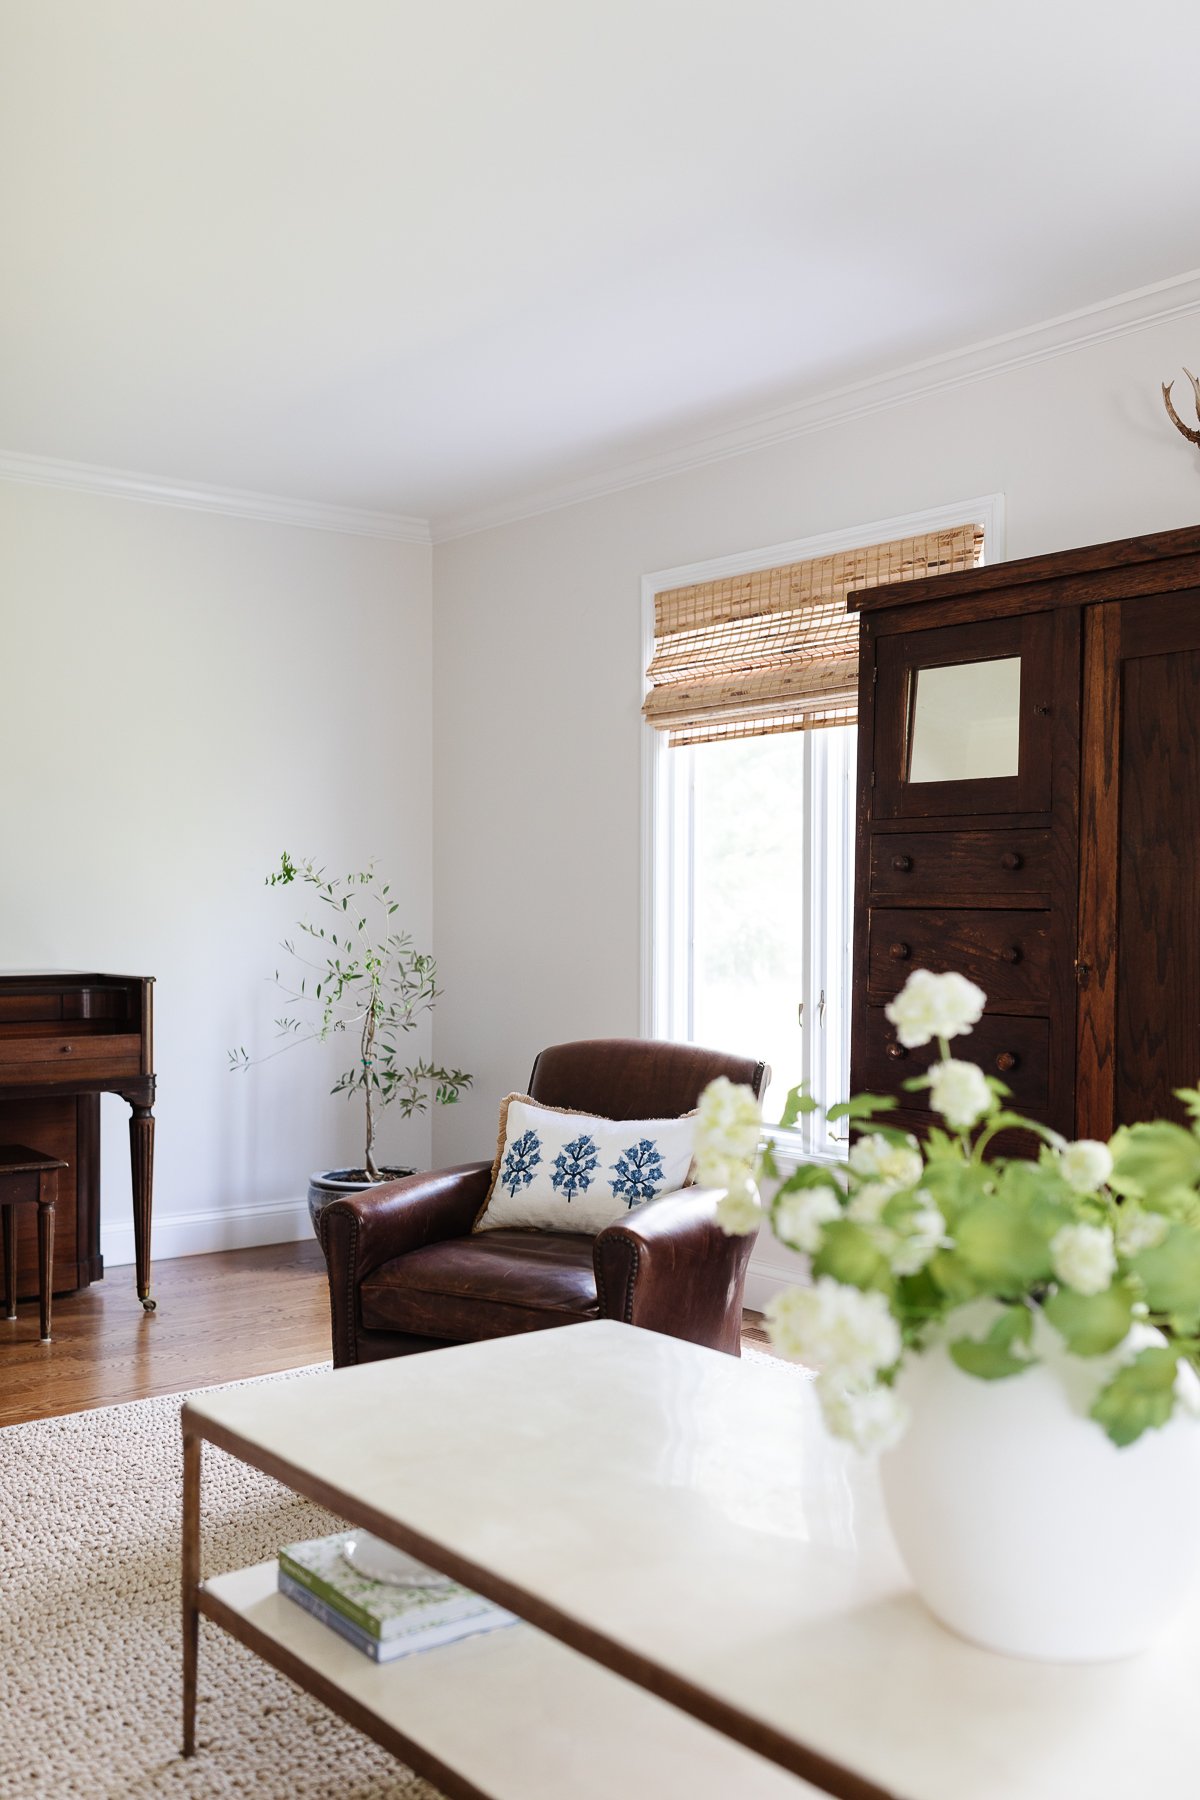 Create a cozy living room with a piano and a vase of flowers, achieving the Pottery Barn look for less.